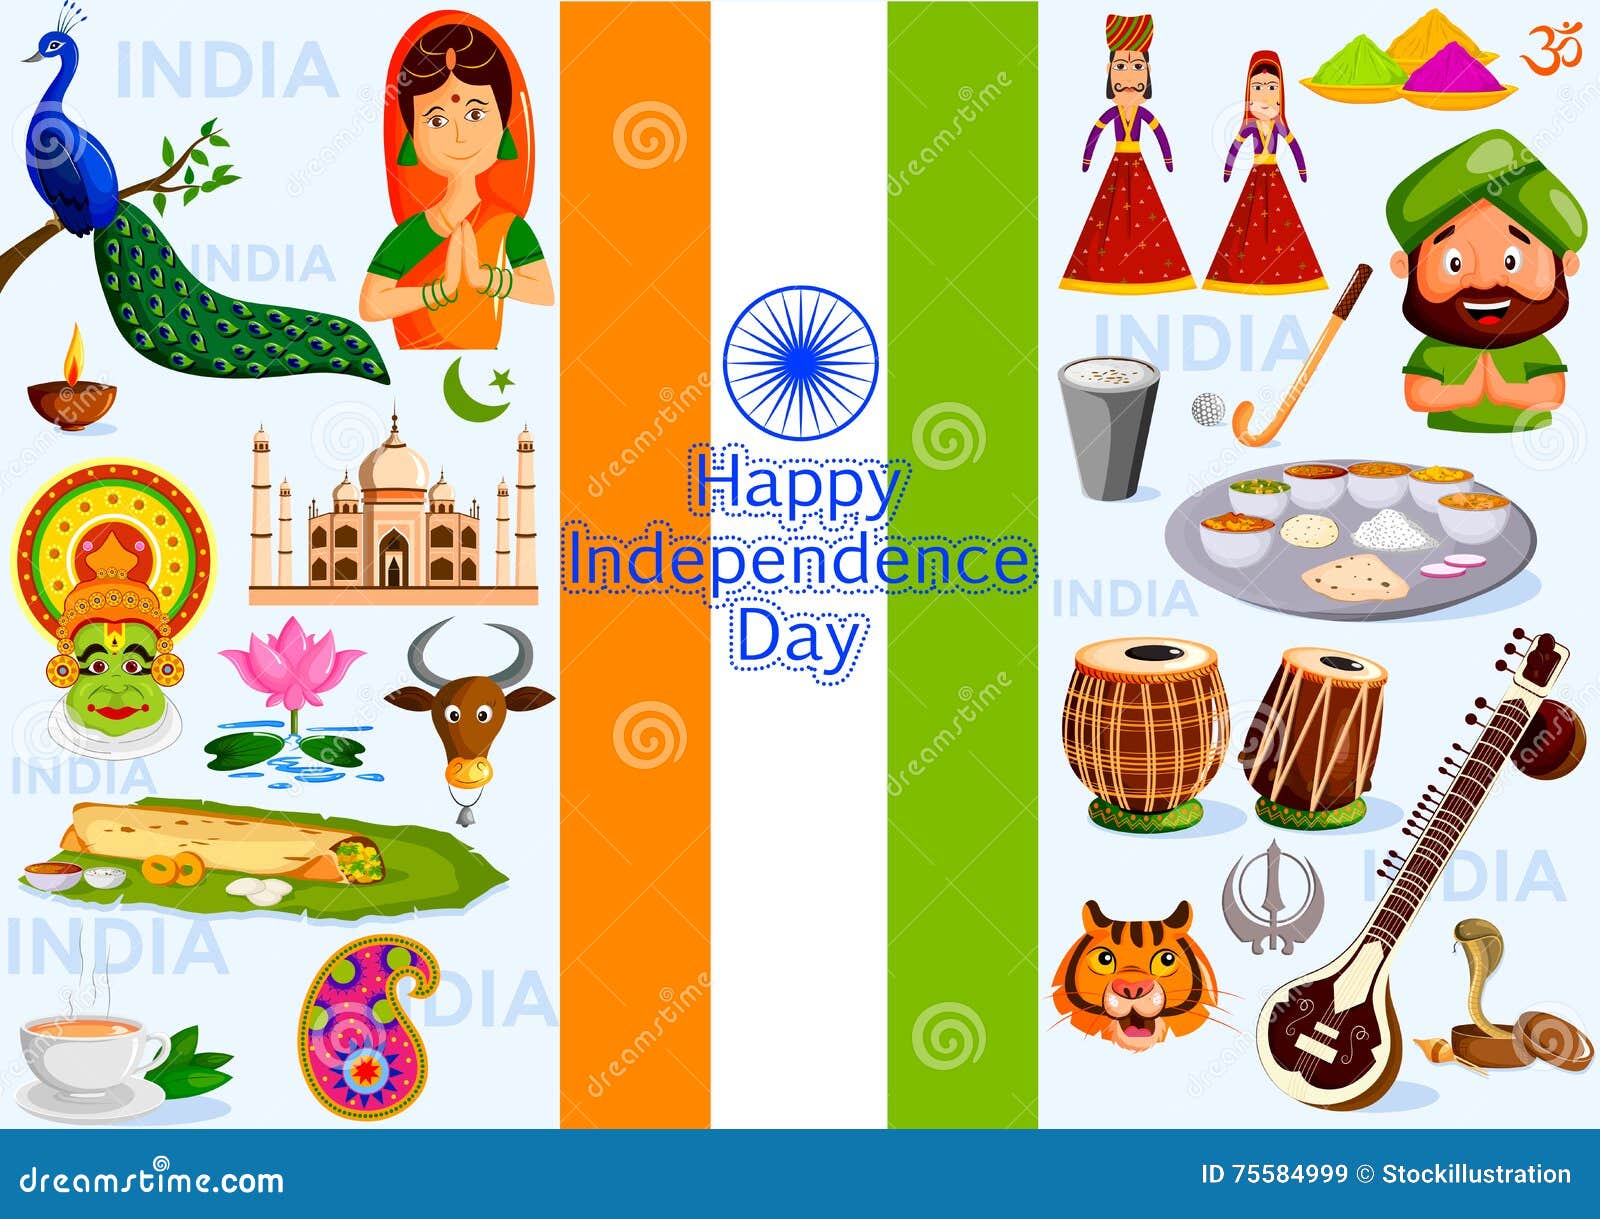 Happy Independence Day of India Stock Vector - Illustration of ...